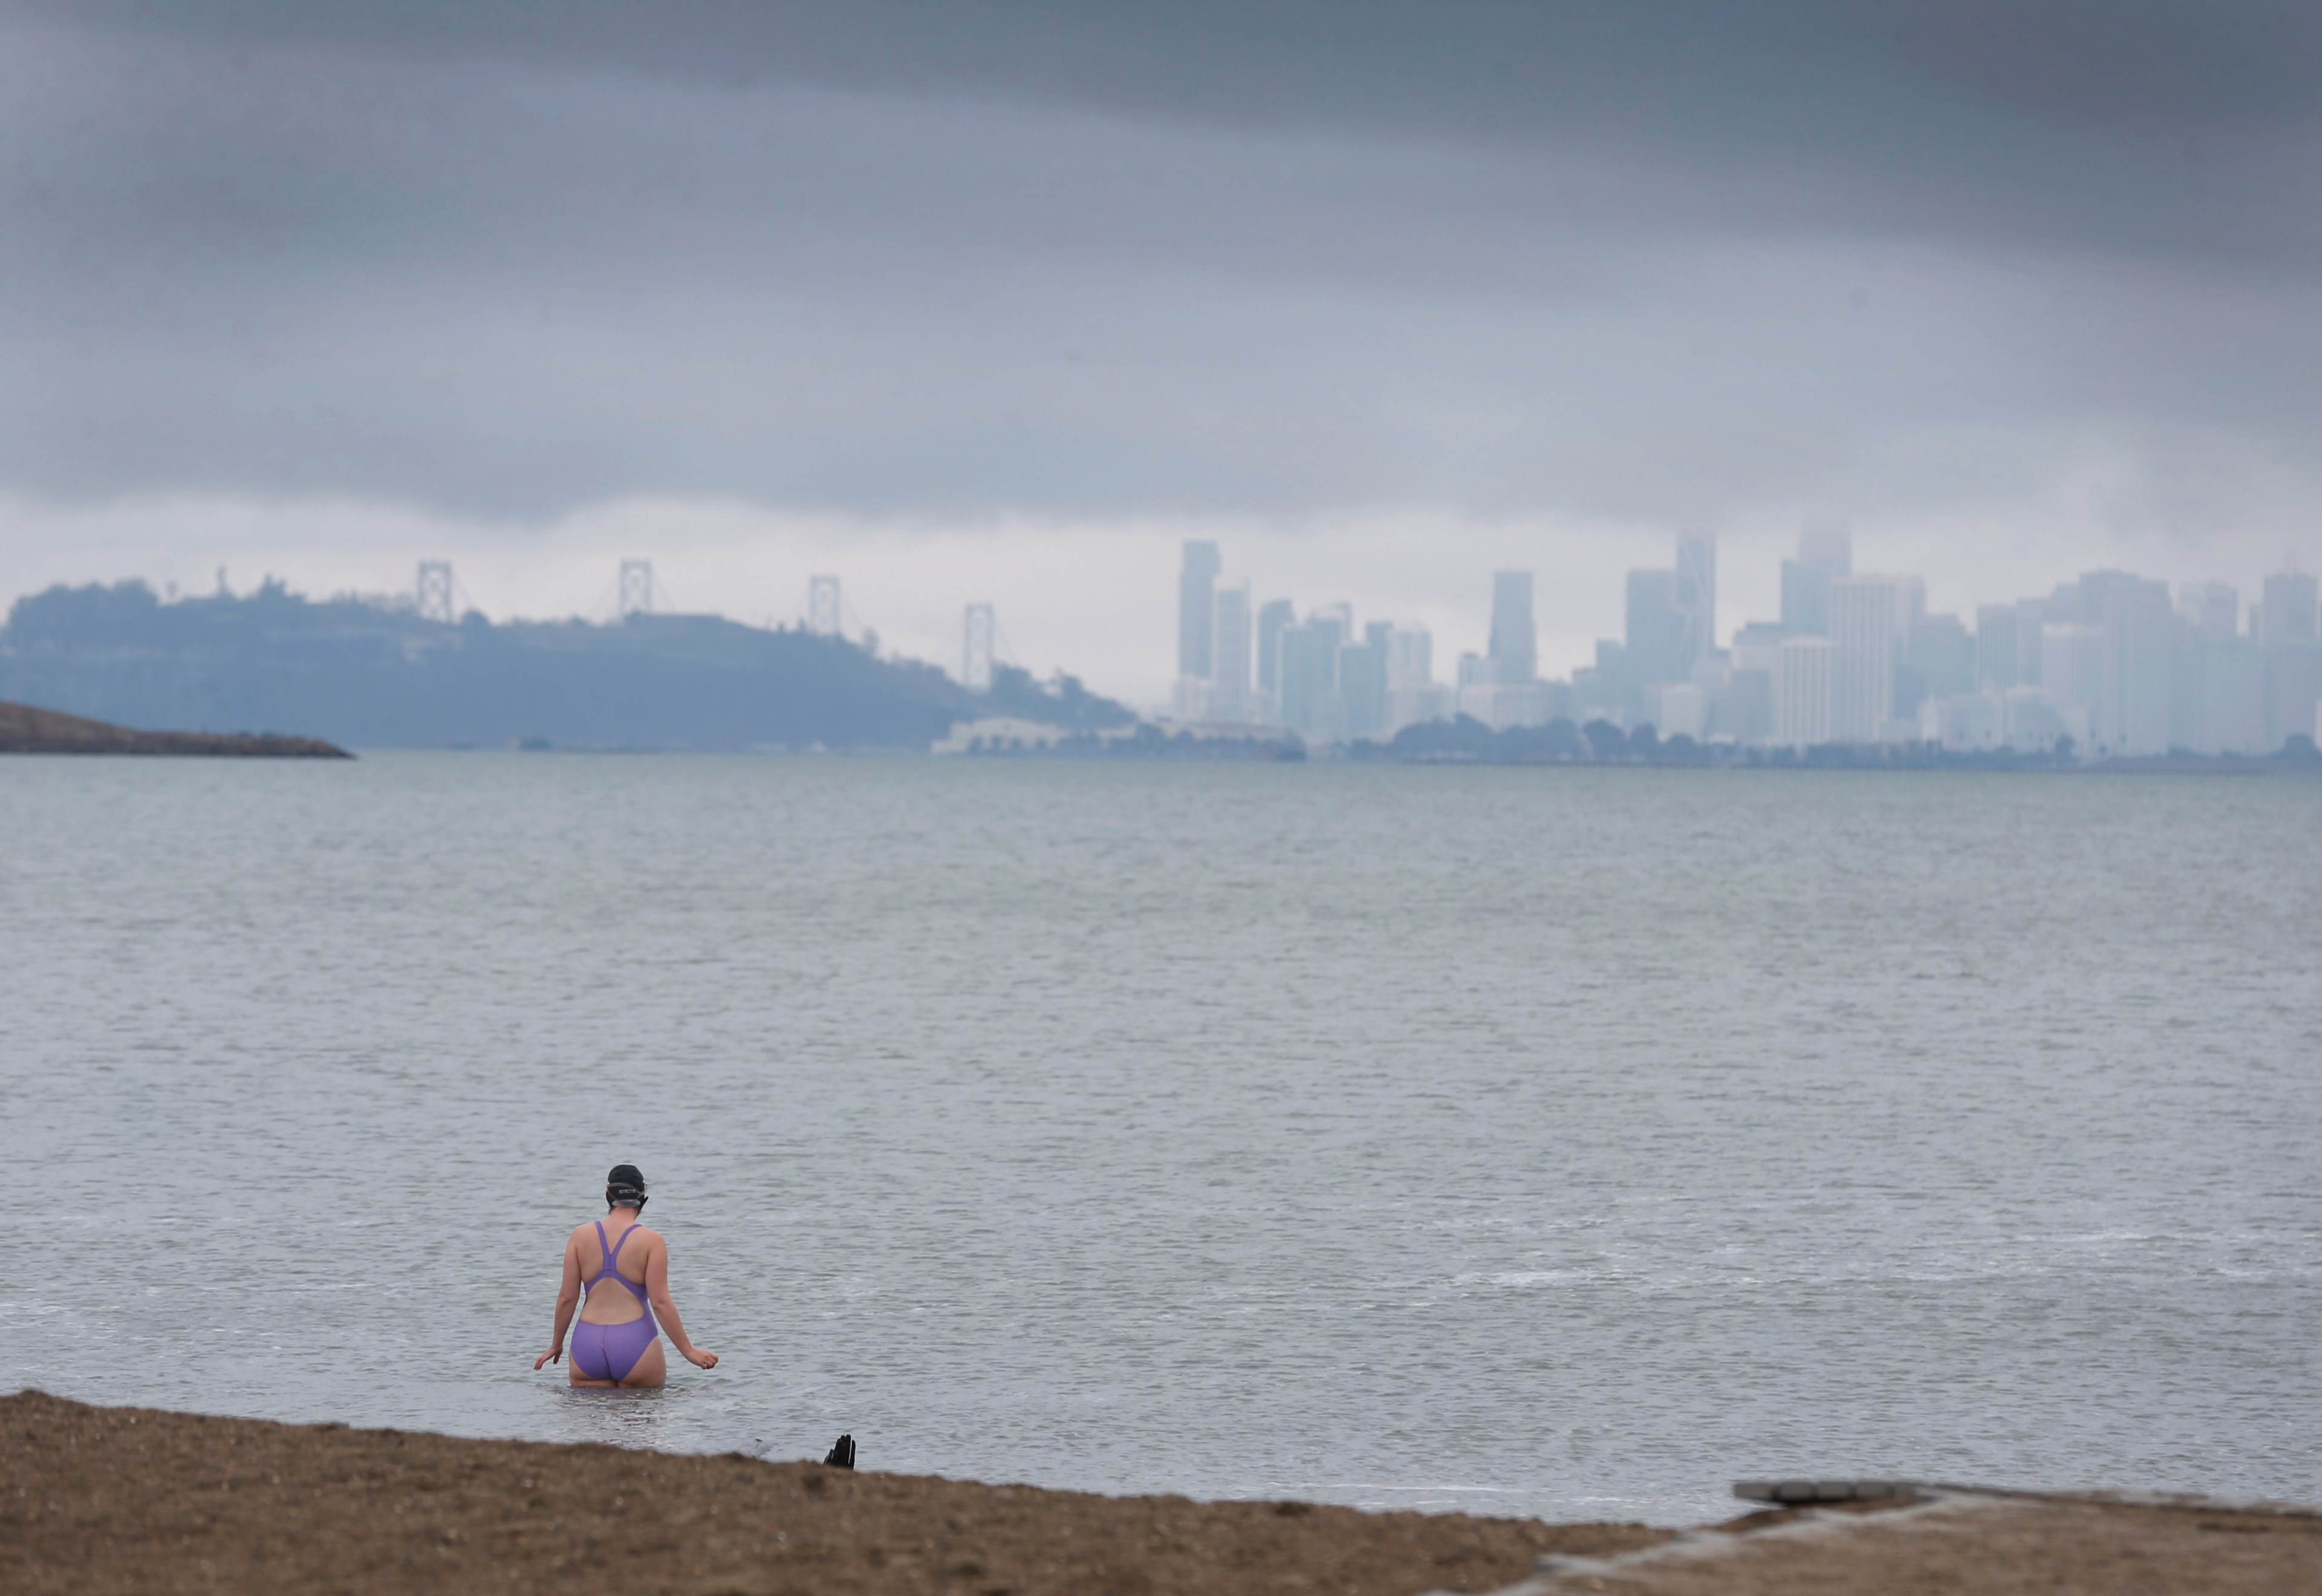 A person in a swimsuit sits by the water, looking at a foggy city skyline in the distance.